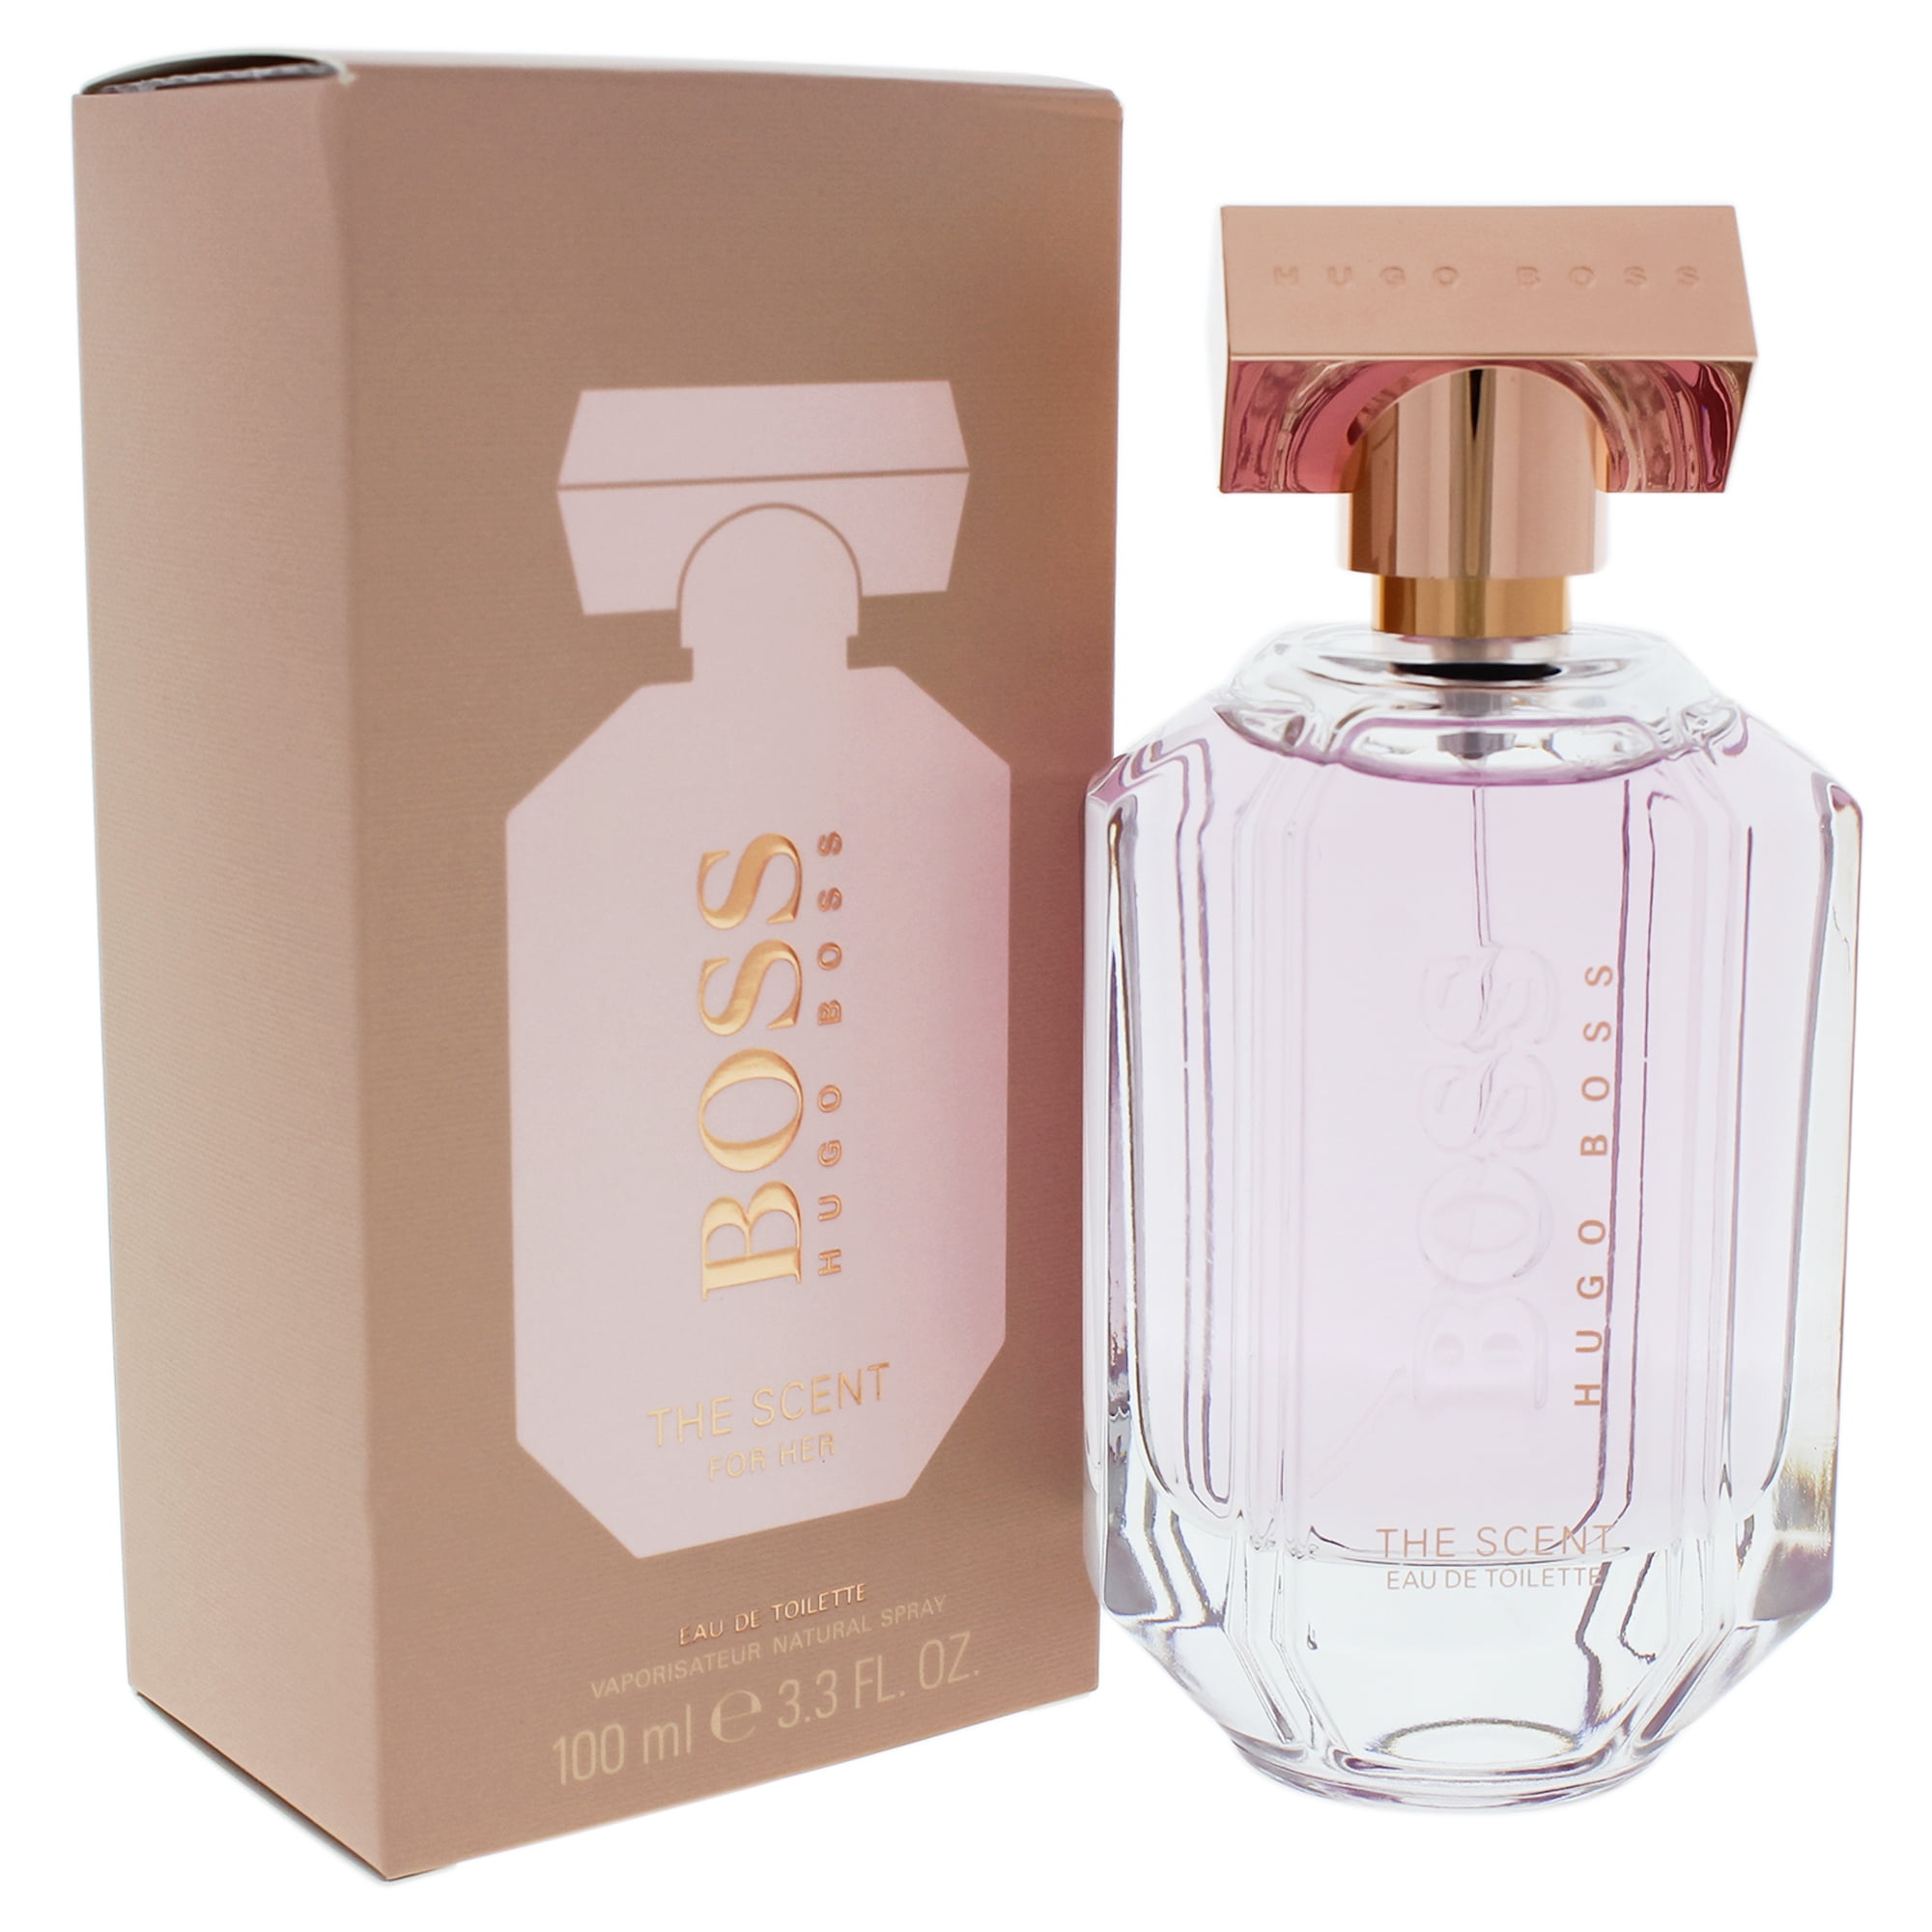 boss the scent for her edp